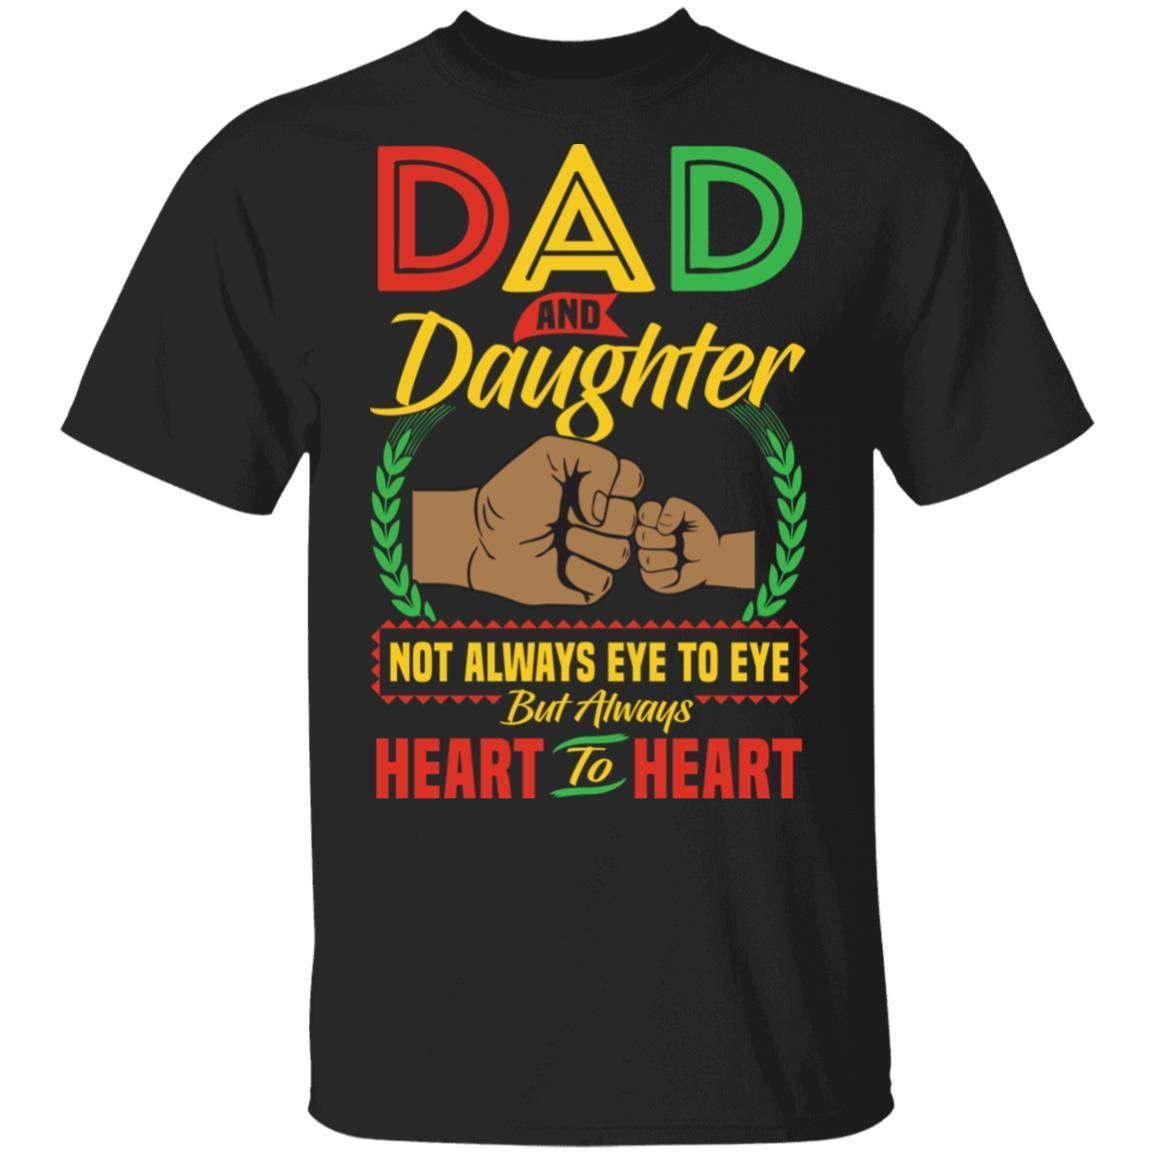 Dad And Daughter Heart To Heart T-Shirt